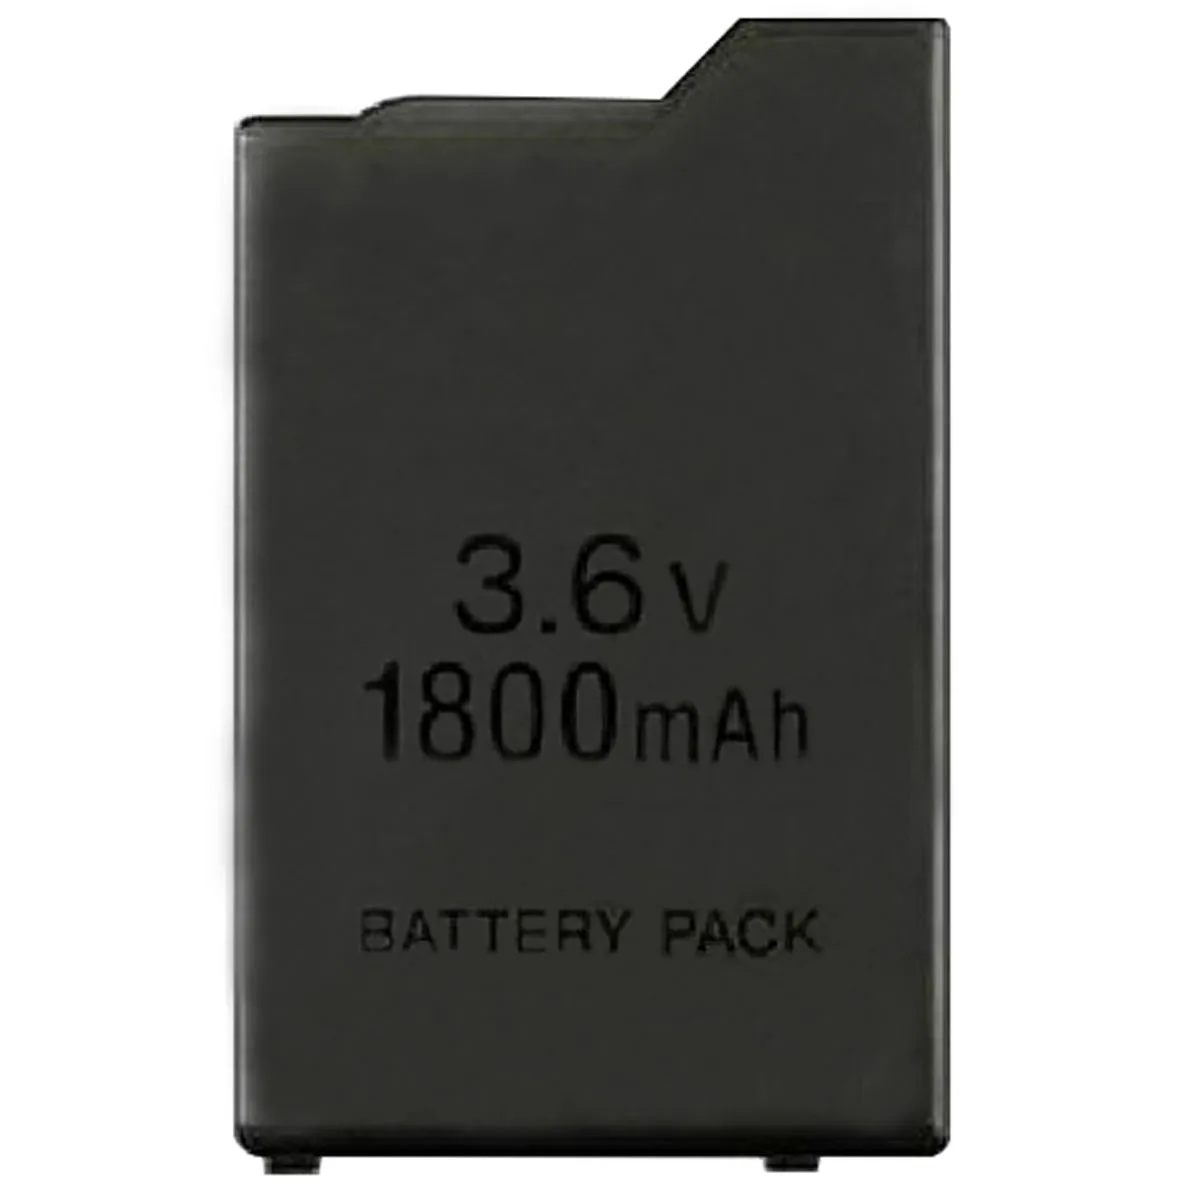 

1800mAh 3.6V PSP1000 Battery Pack For Sony PSP-110 PSP 1000 Console Gamepad Rechargeable Batteries